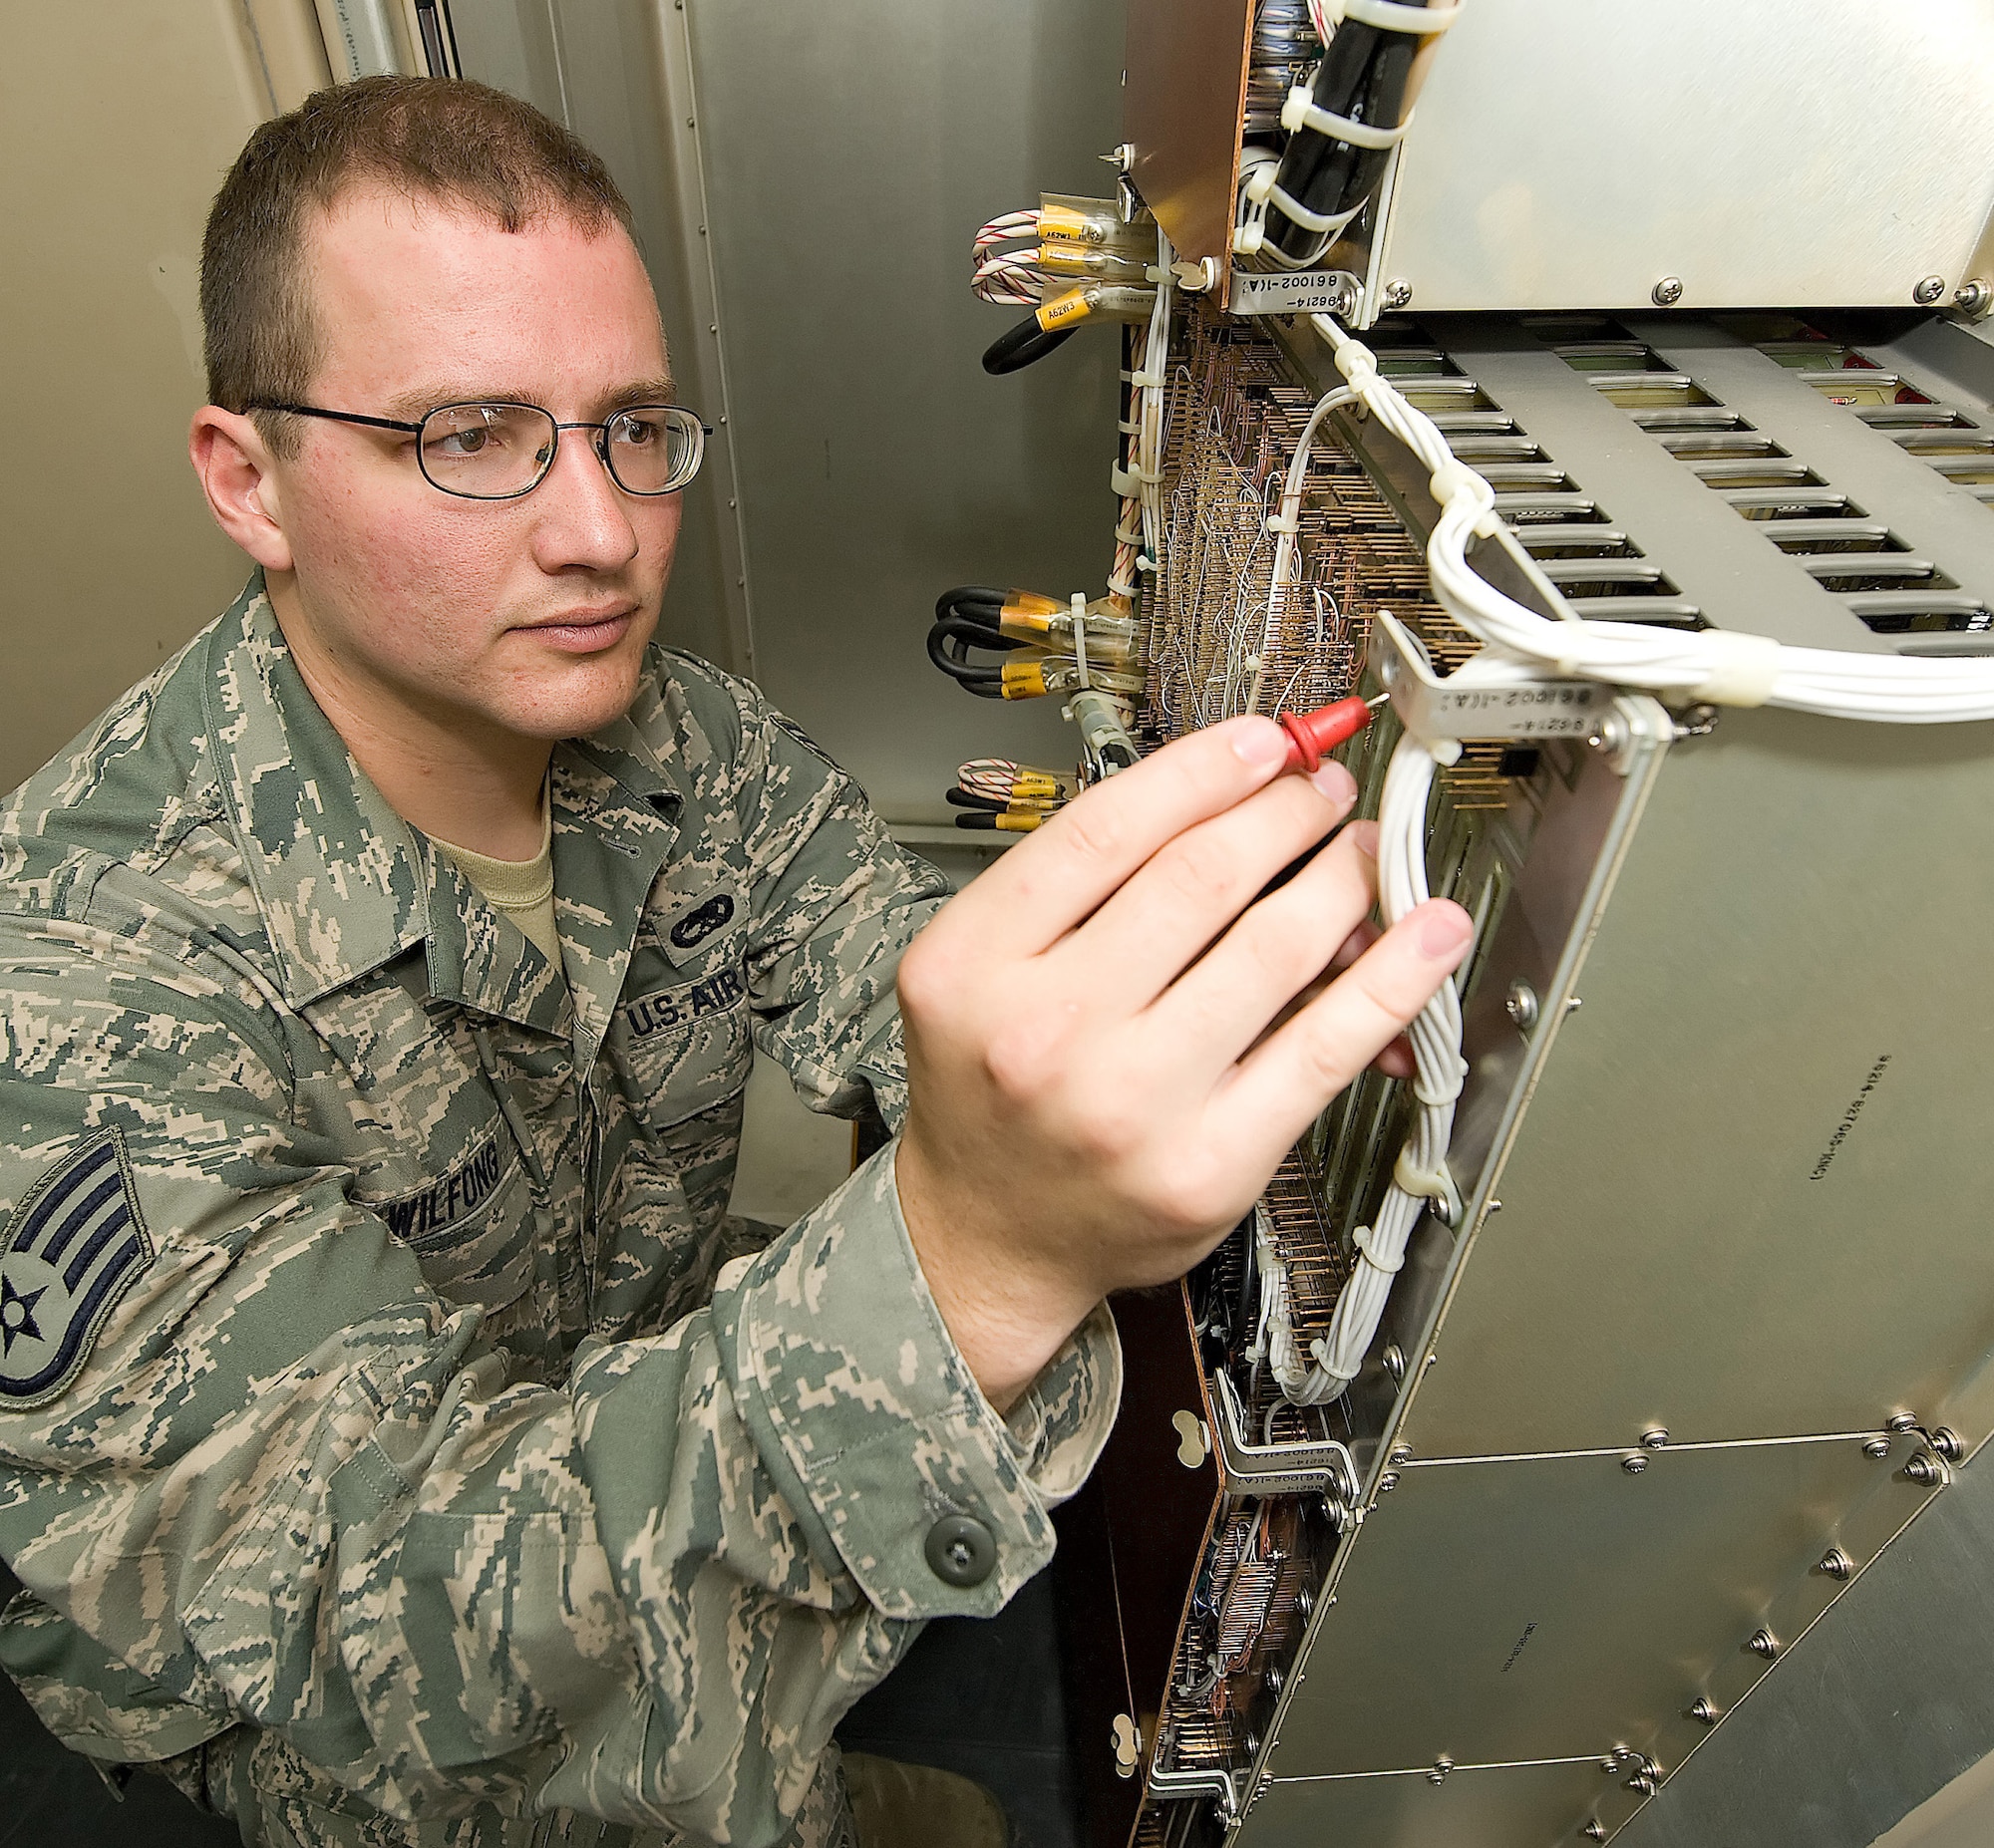 Staff Sgt. Josh Wilfong, 436th Communications Squadron ground radar systems technician, uses an instrument to check for electricity, called the digital multi-meter, which checks the accuracy of voltages inside the shelter of the Airport Surveillance Radar. (Air Force photo/ Jason Minto)